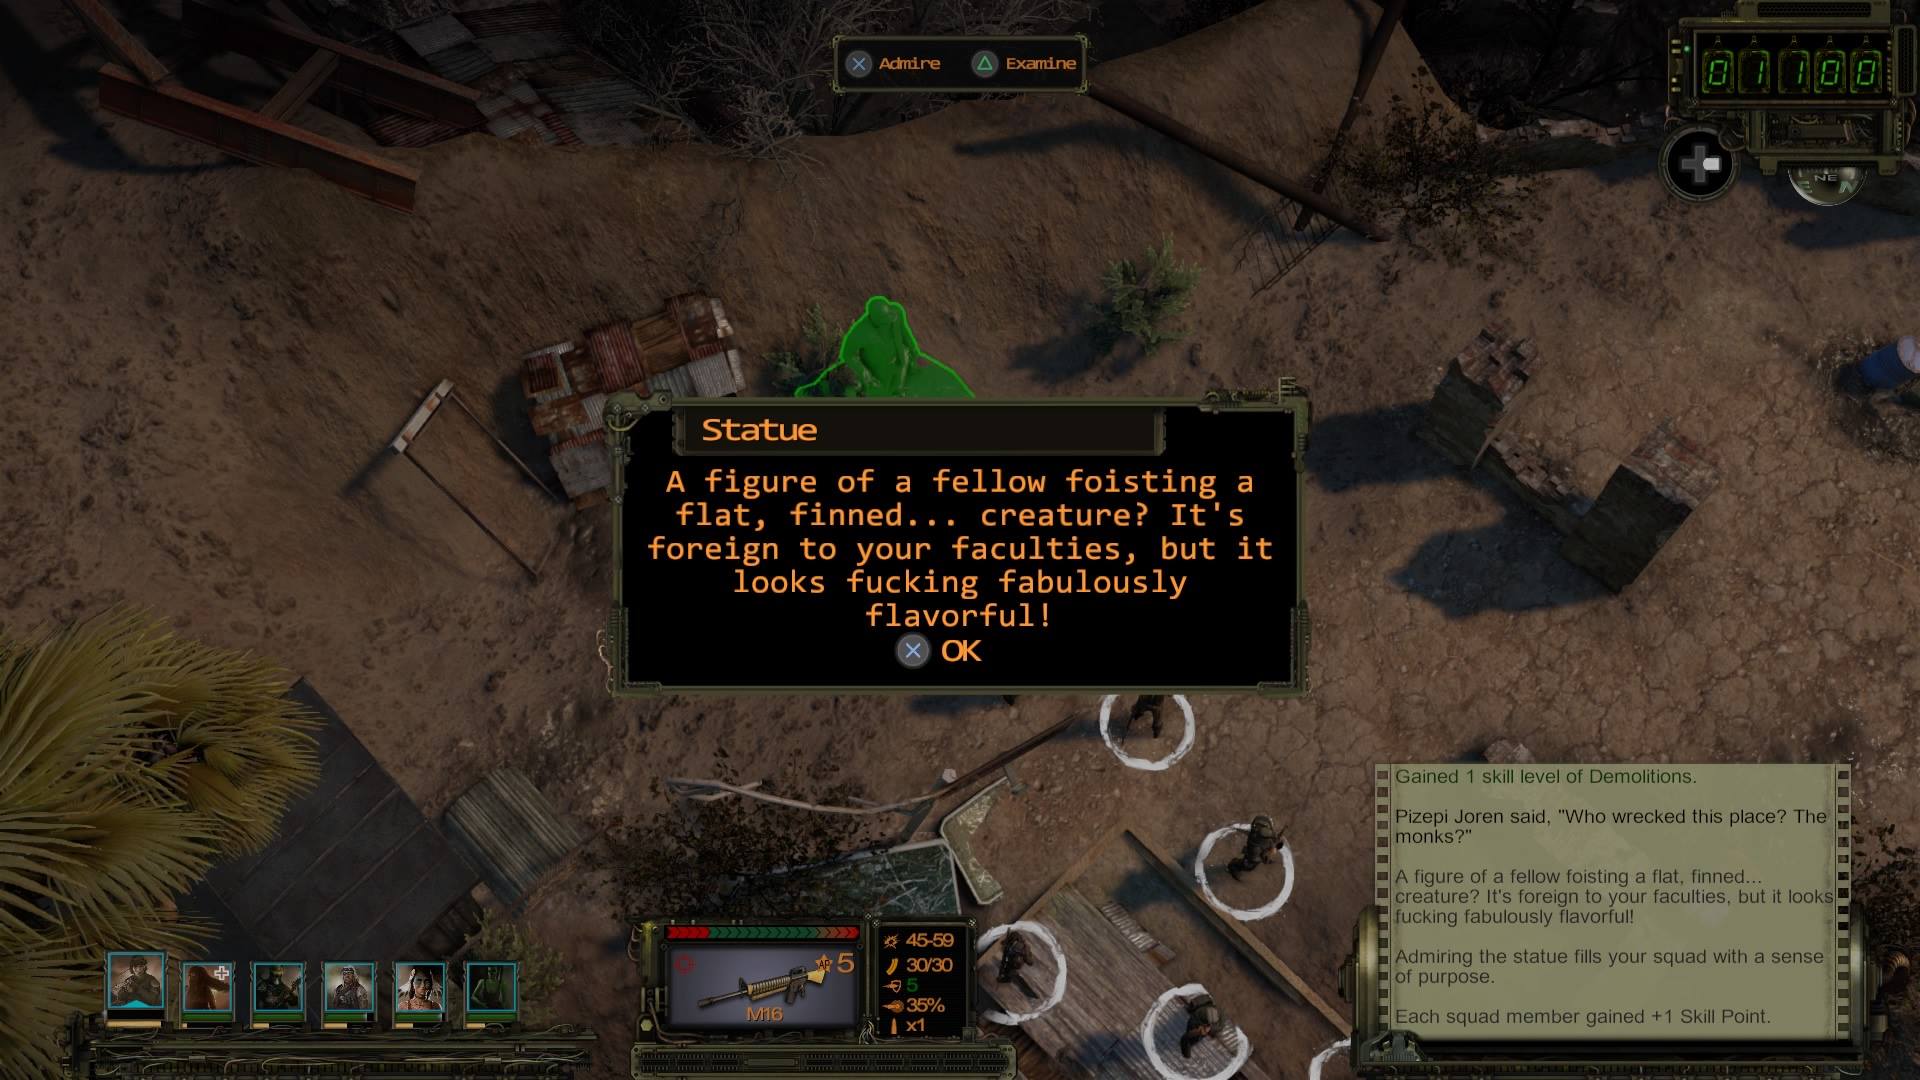 Official GBAtemp Review: Wasteland 2: Director's Cut (PlayStation 4) |  GBAtemp.net - The Independent Video Game Community